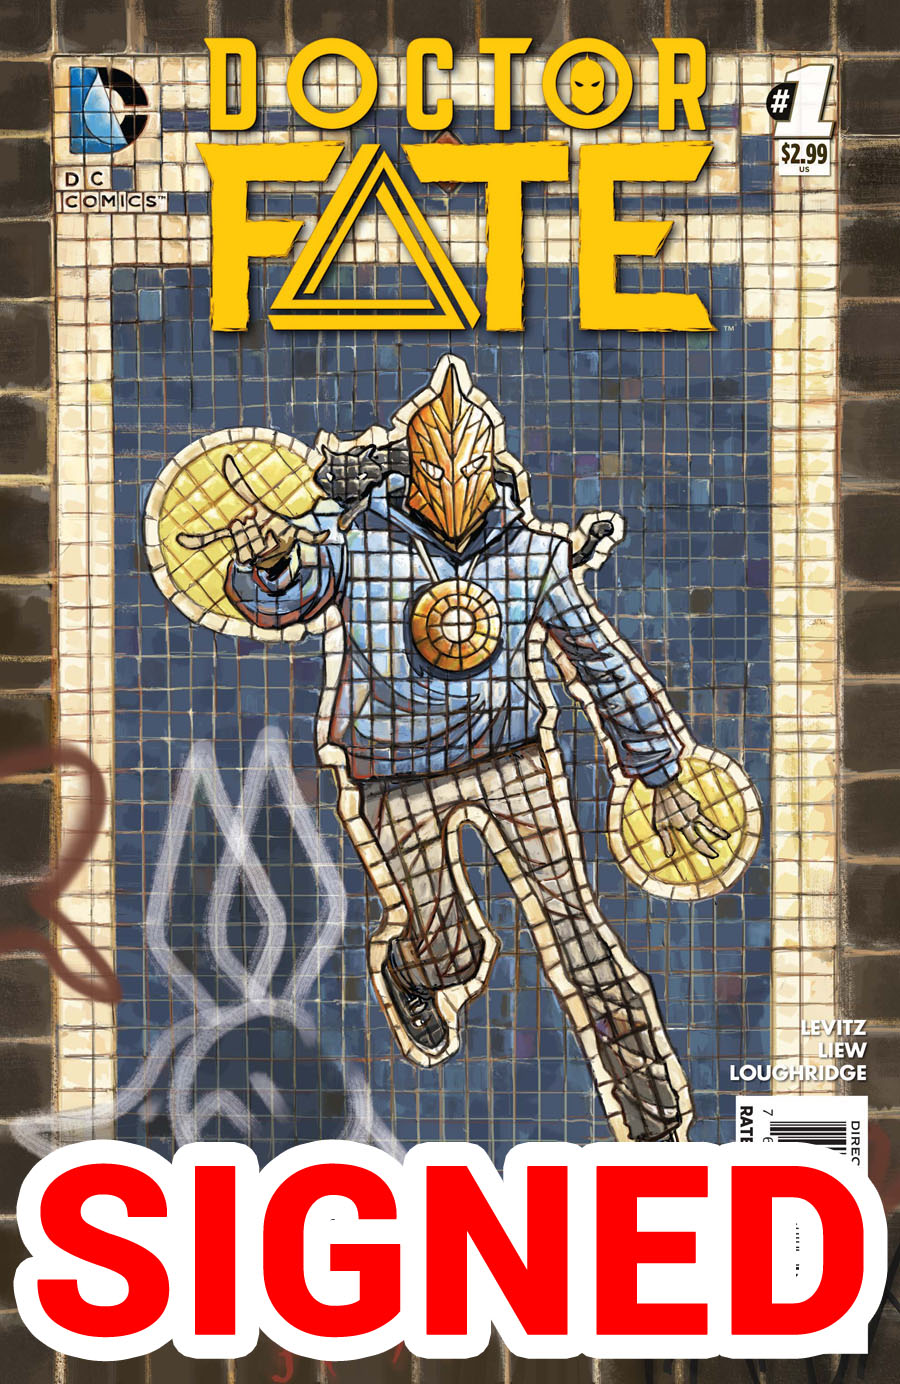 Doctor Fate Vol 4 #1 Cover D Regular Sonny Liew Cover Signed By Paul Levitz & Sonny Liew